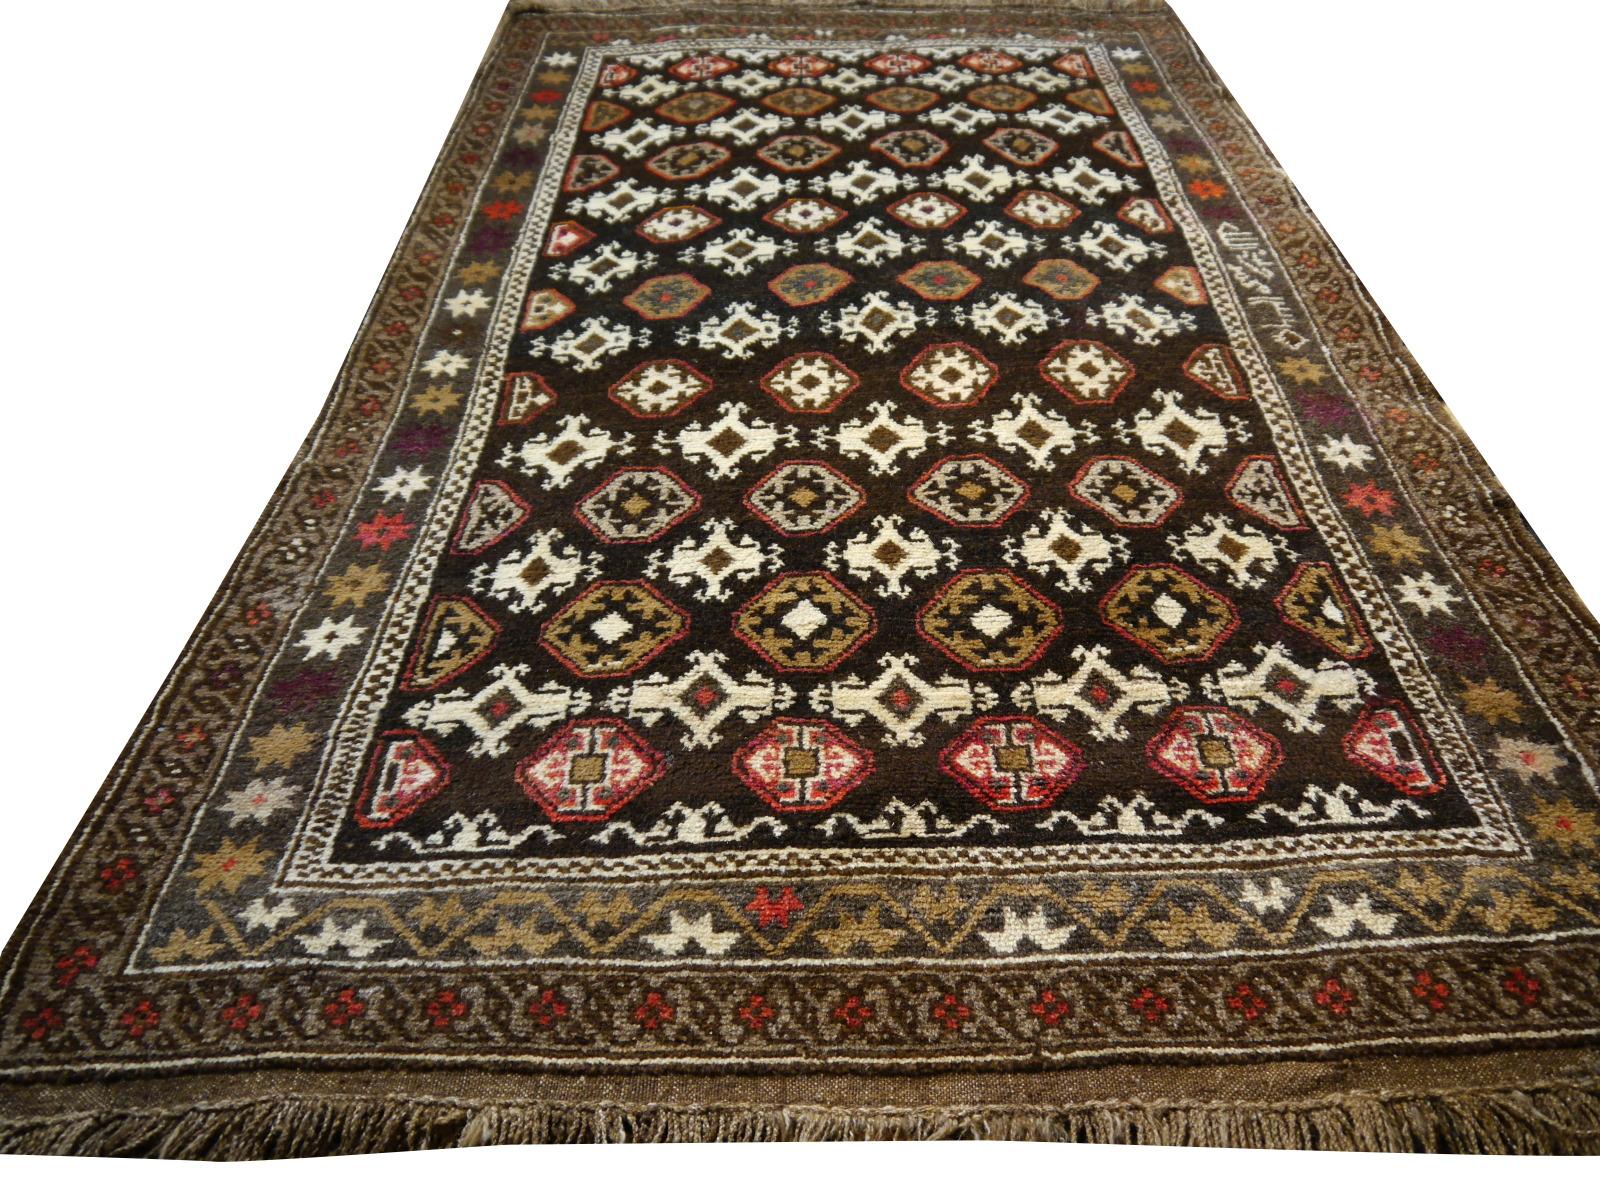 Vintage midcentury Karabagh rug.

A beautiful Karabagh rug from Azerbeijan. 
• Beautiful vintage rug
• All handmade
• Pile pure wool
• Traditional Design
• Condition: Very good, wool pile on wool warp and weft.

All of our rugs, carpets and Kilims